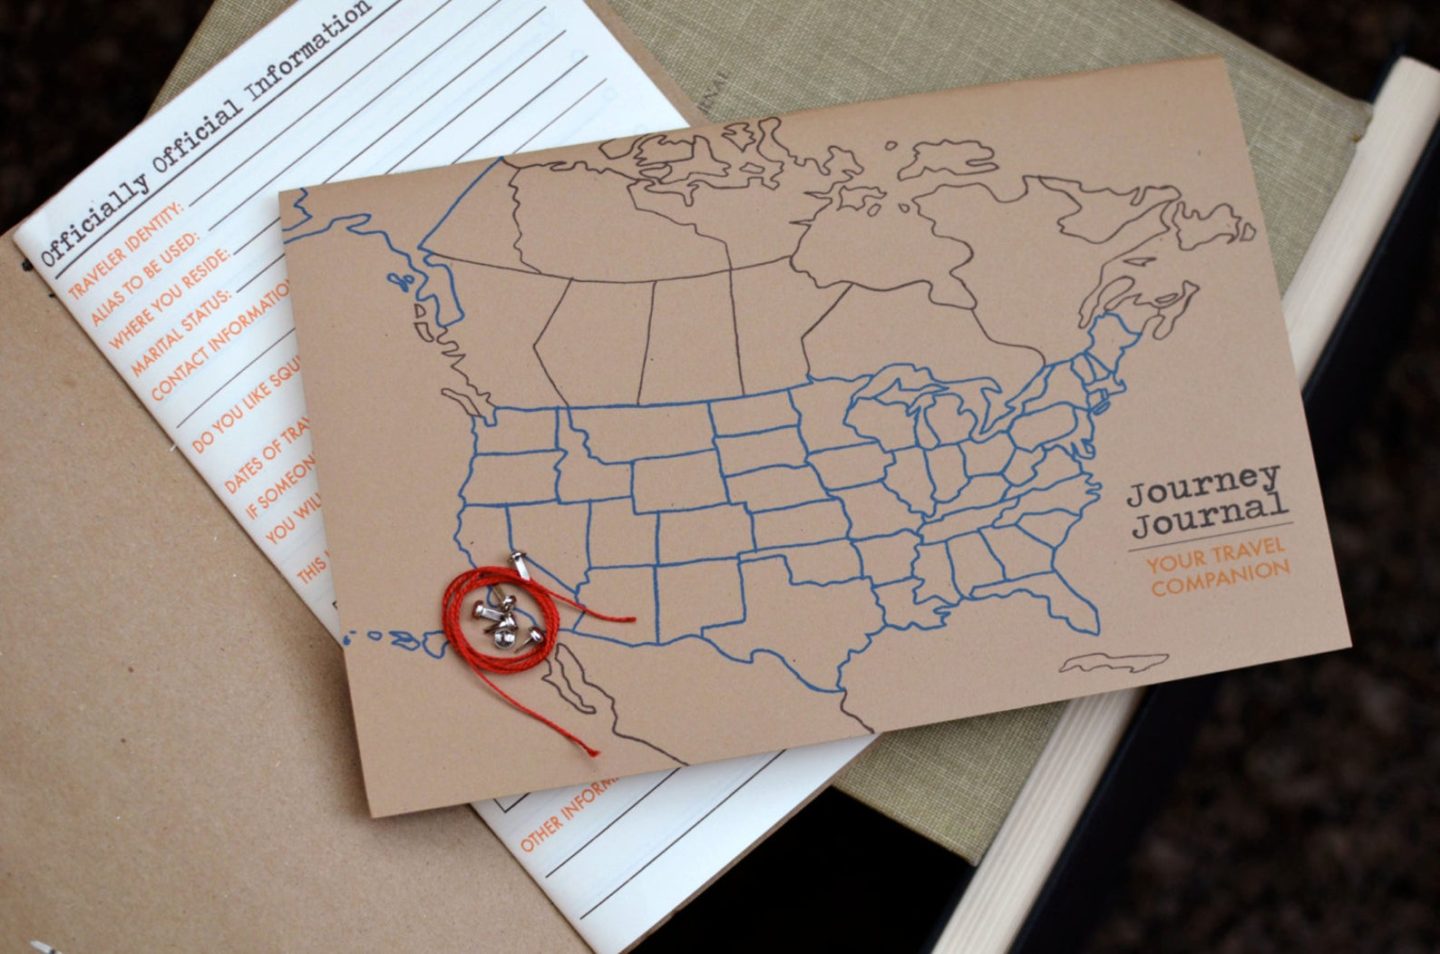 U.S. Journey Journal helping you track your travels